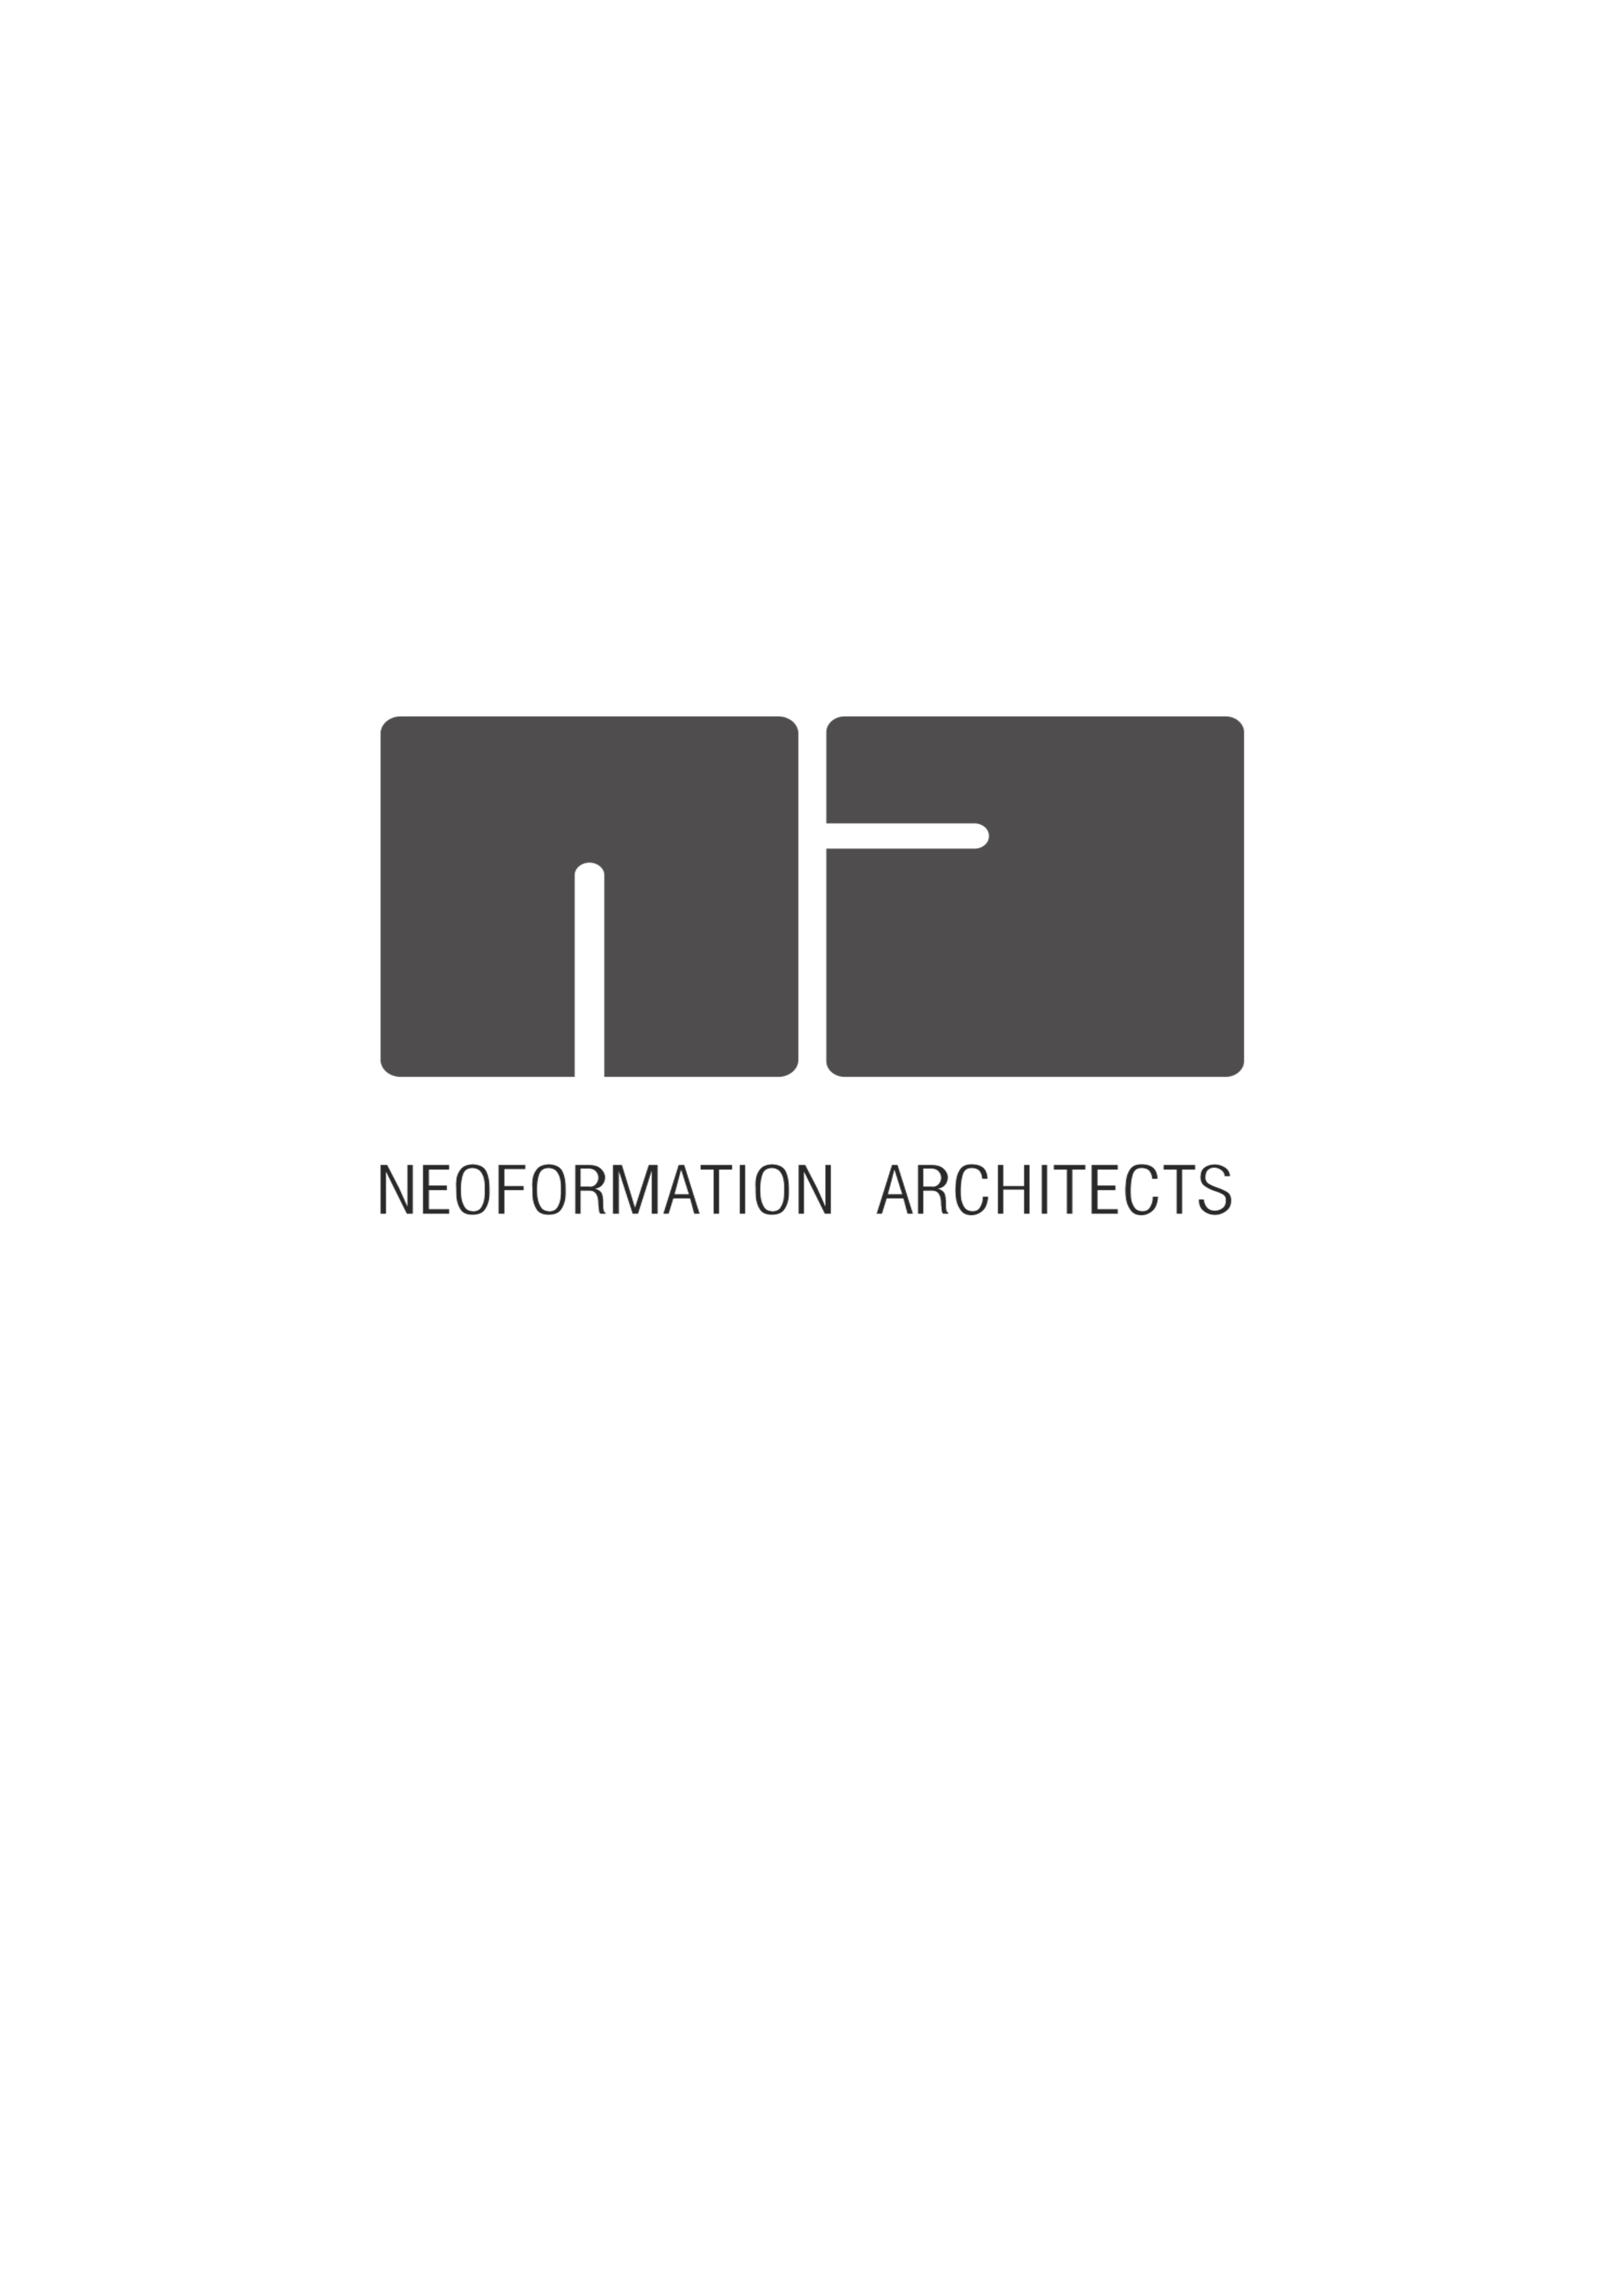 Neoformation Architects